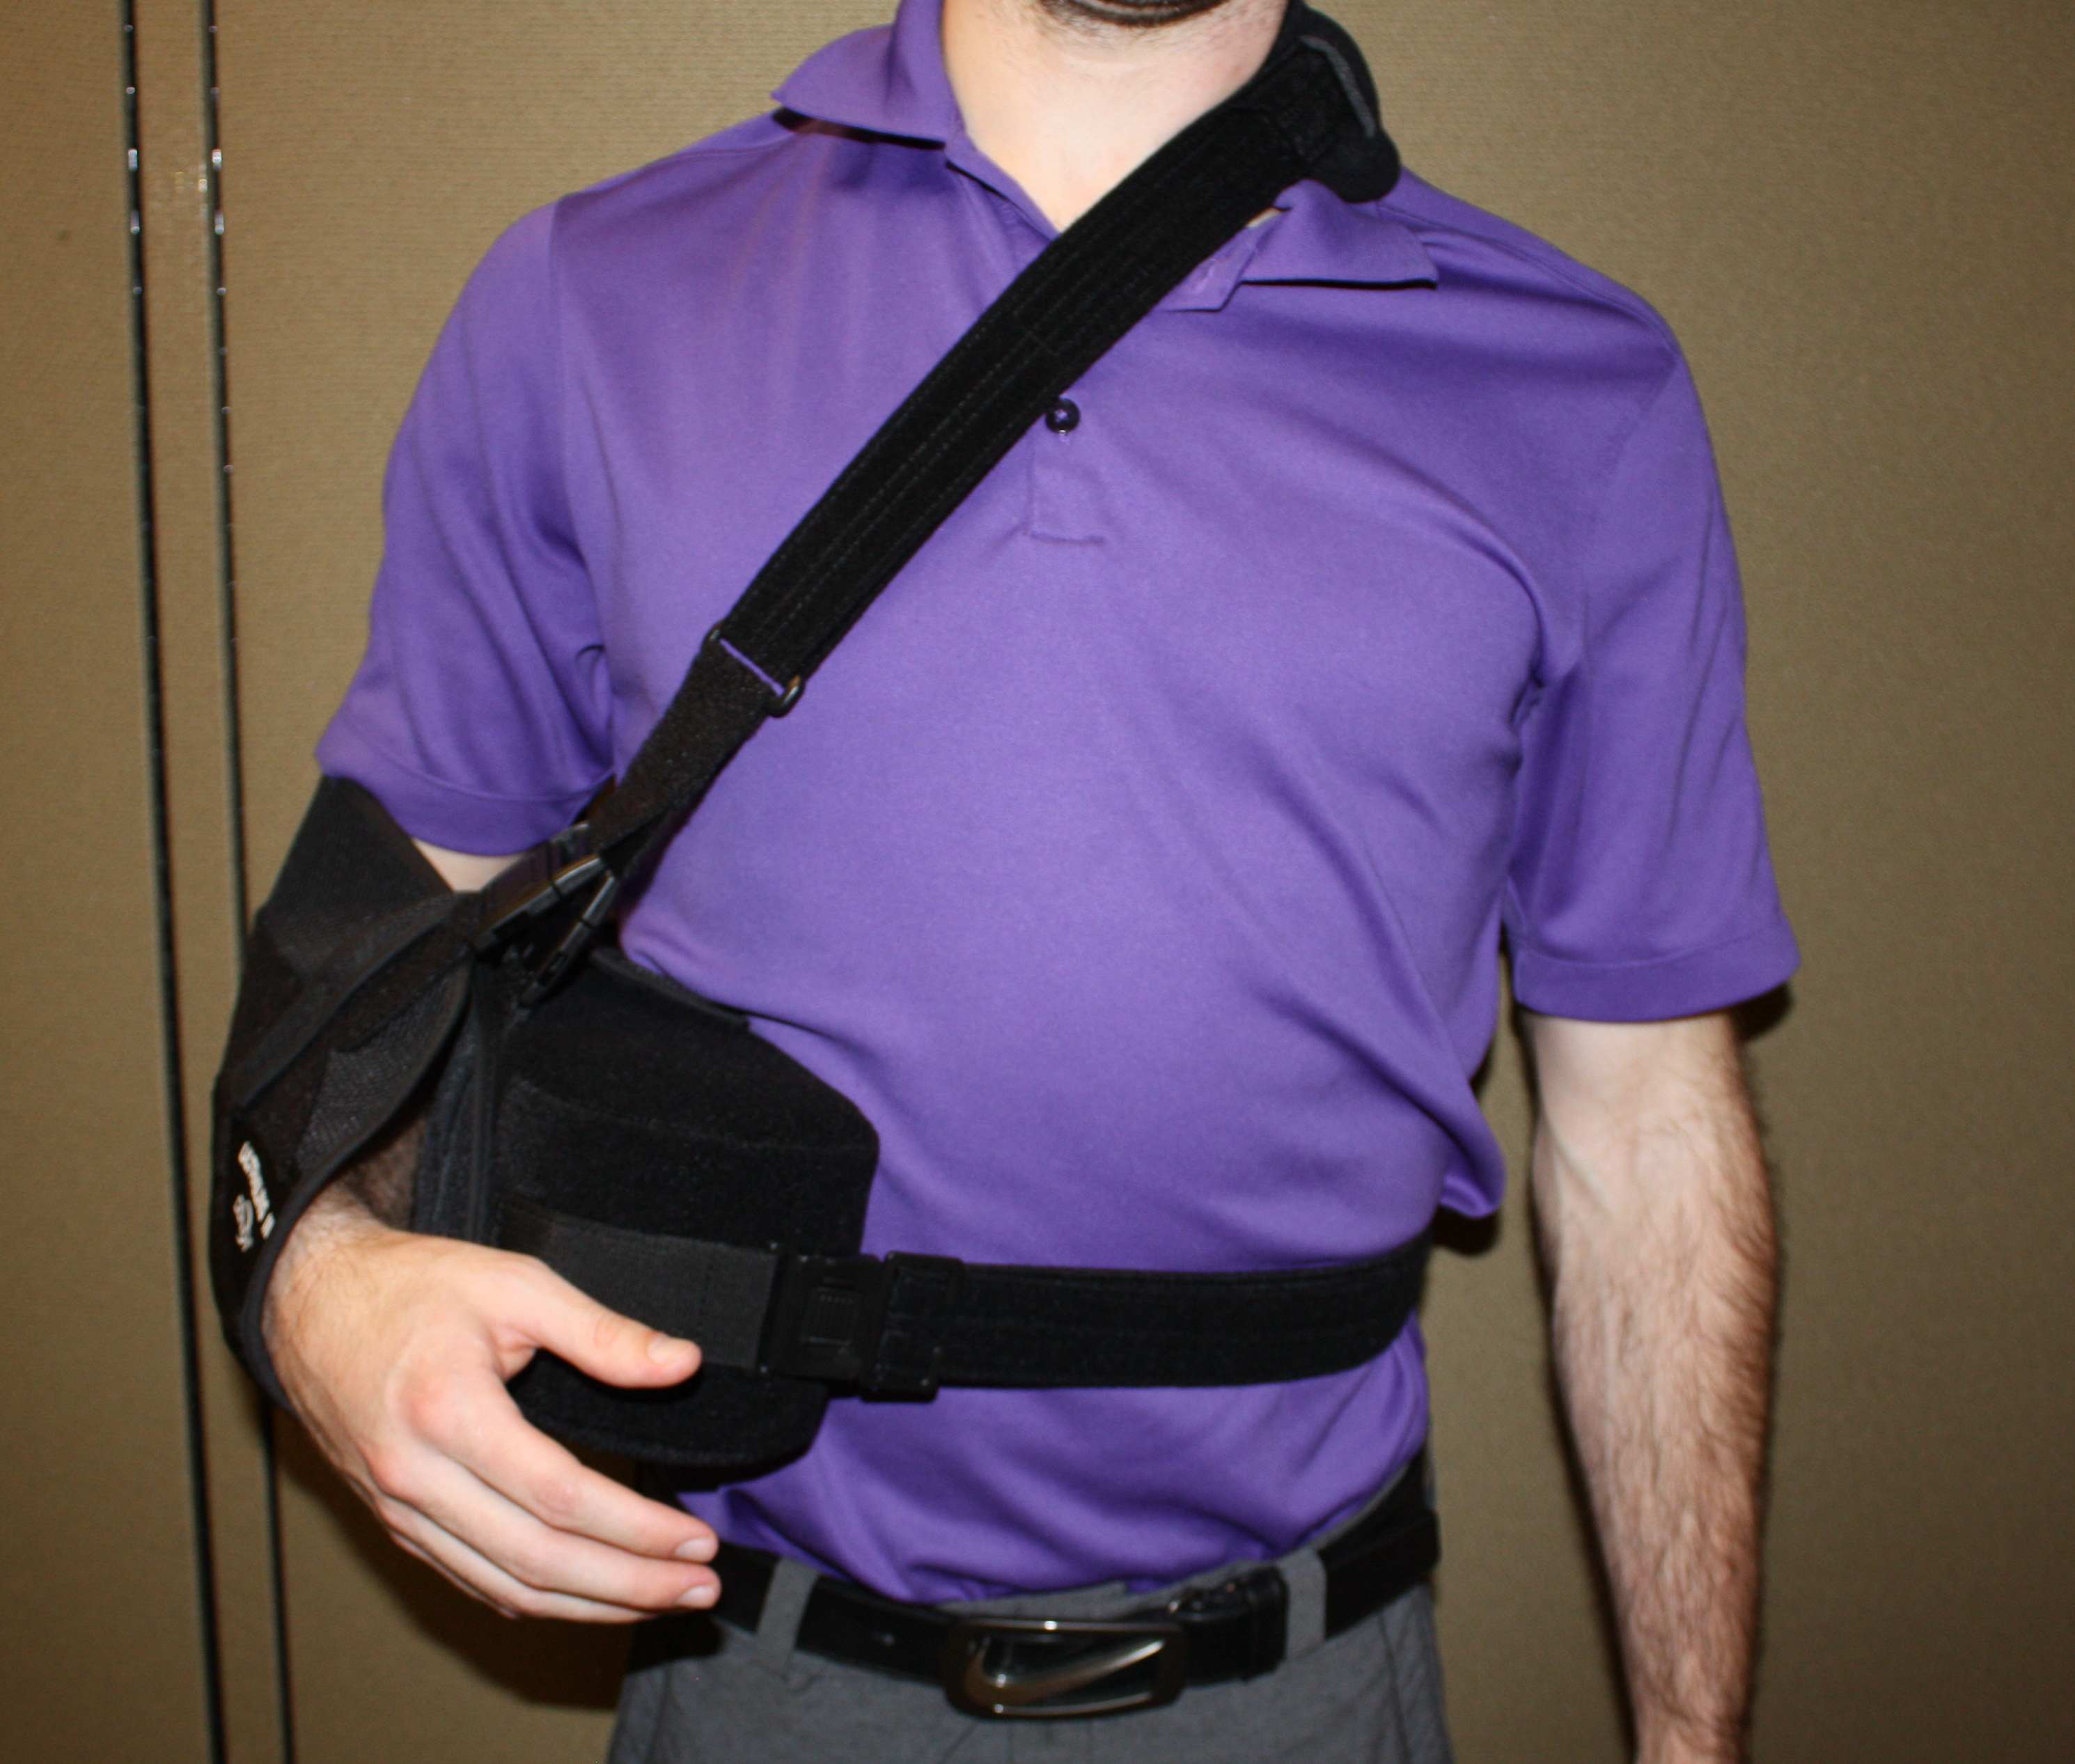 Man standing with shoulder immobilizer